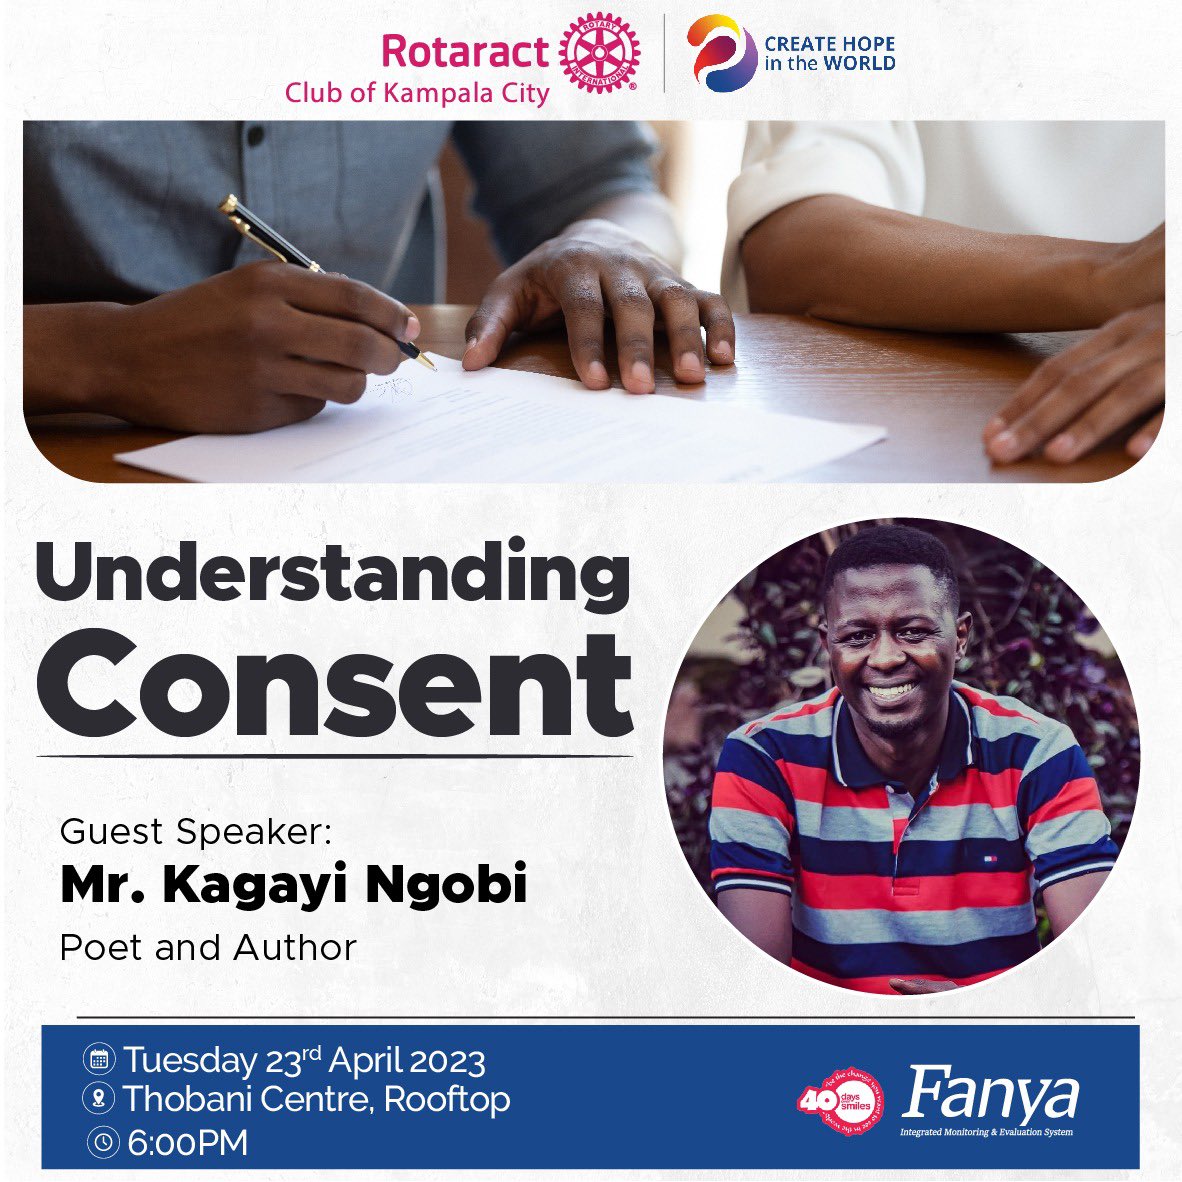 Join us this Tuesday at Thobani Center Rooftop as we have a deep talk about “CONSENT” Explore the nuances of Respect and Communication in Human Interactions. ⏰ 6:00pm #rotaractklacity #Tuesday